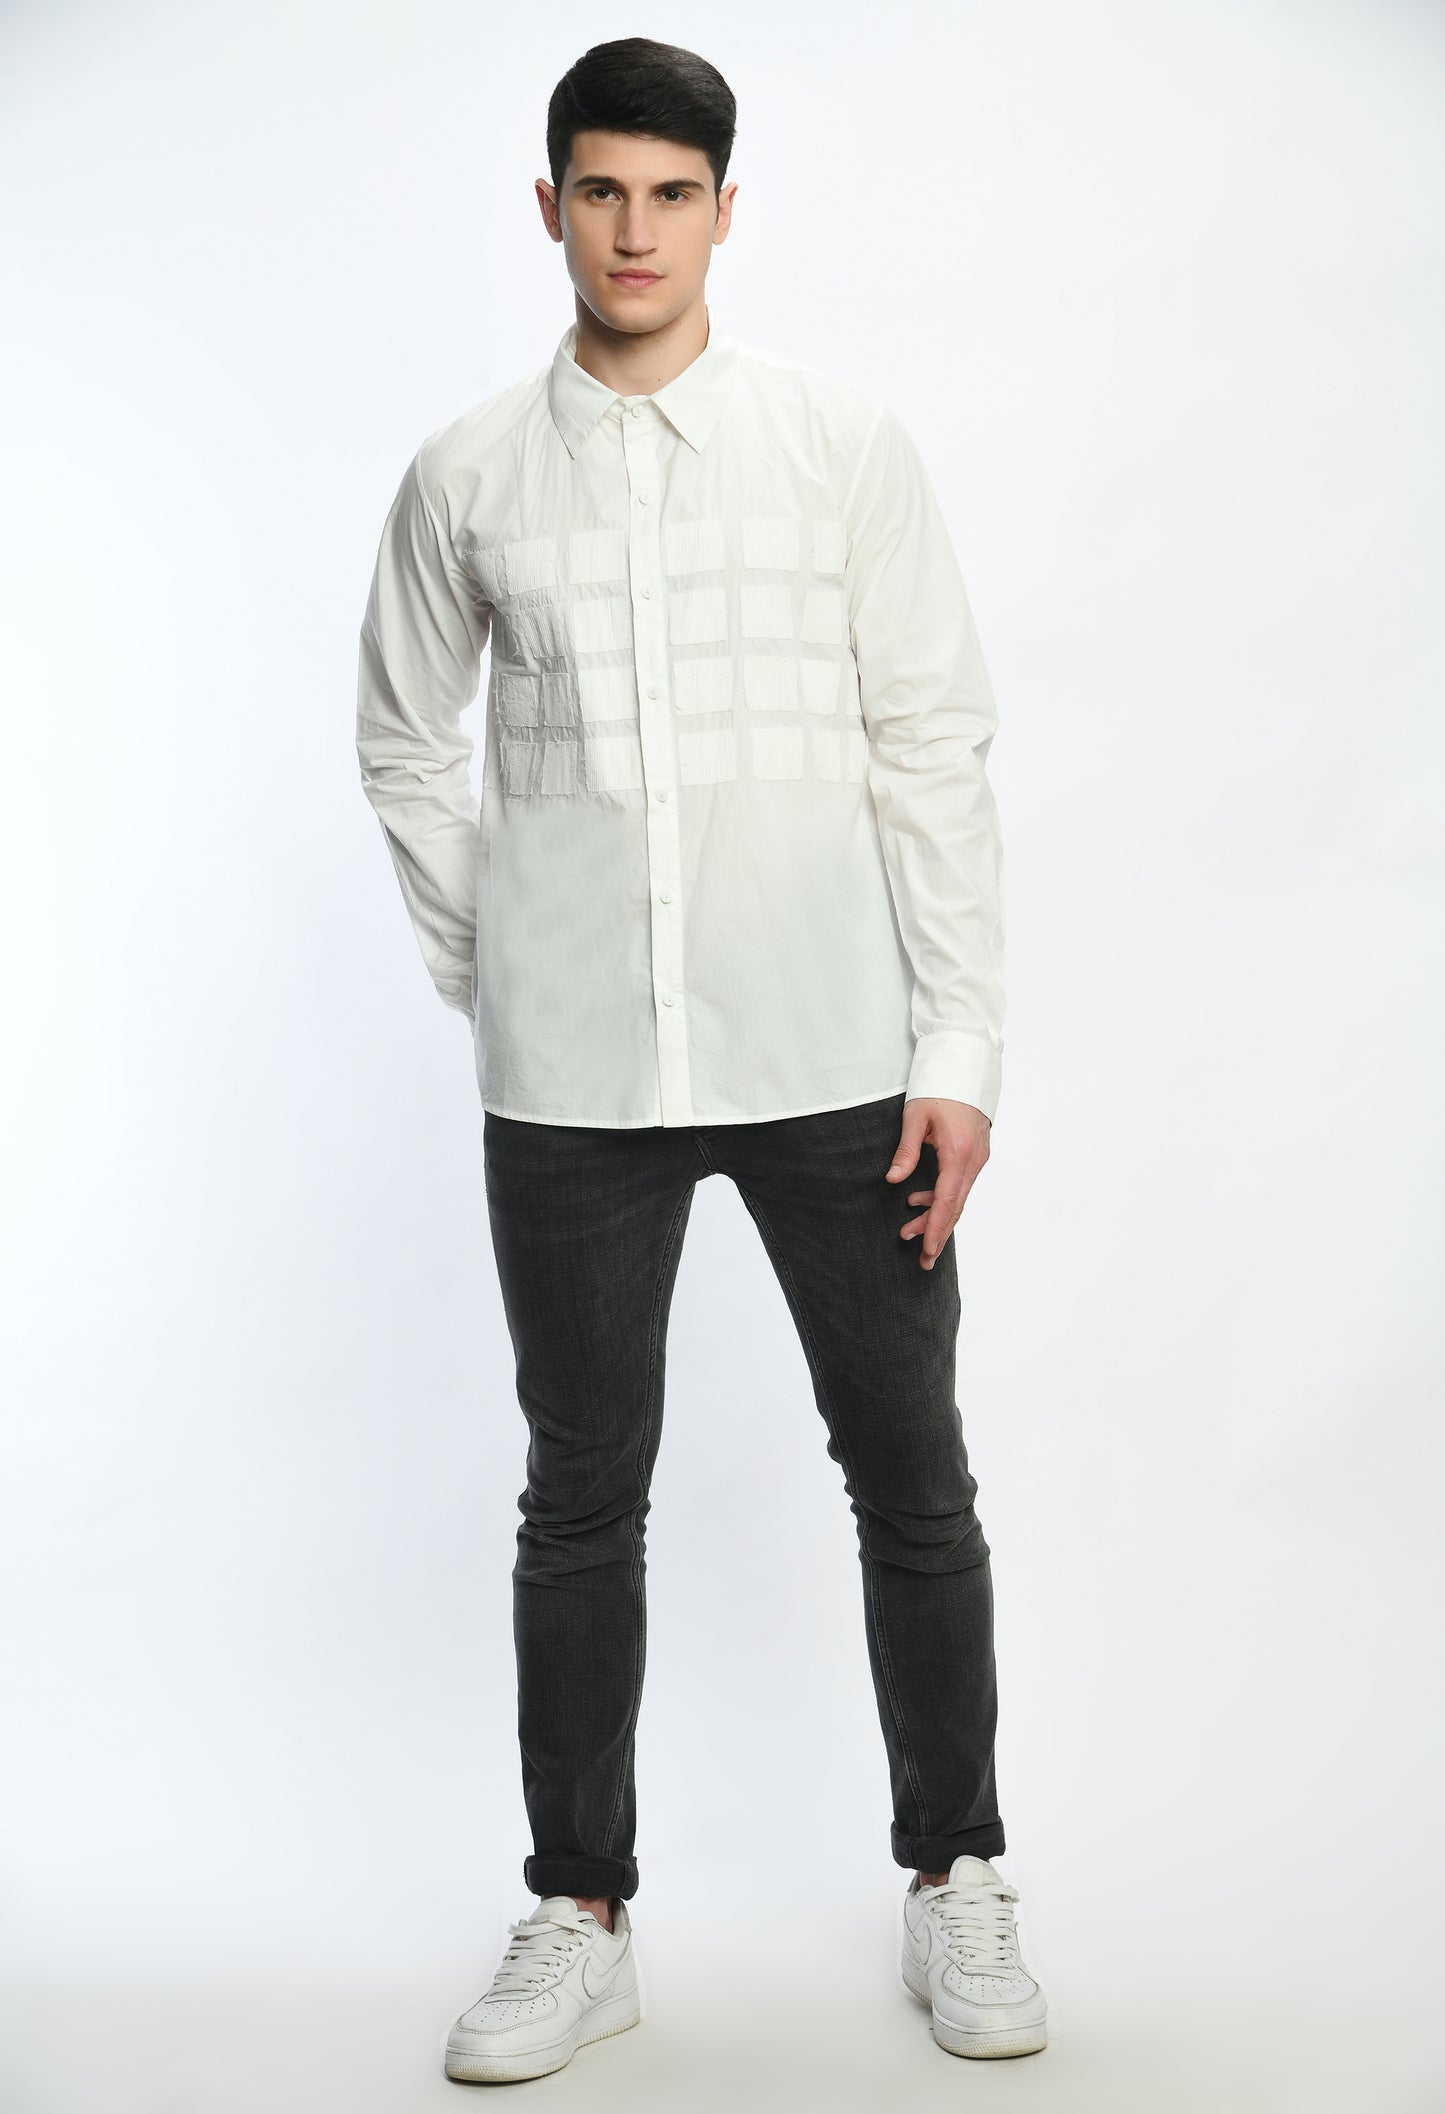 A White cotton shirt showcasing tone on tone appliqué work in form of small square cut design.